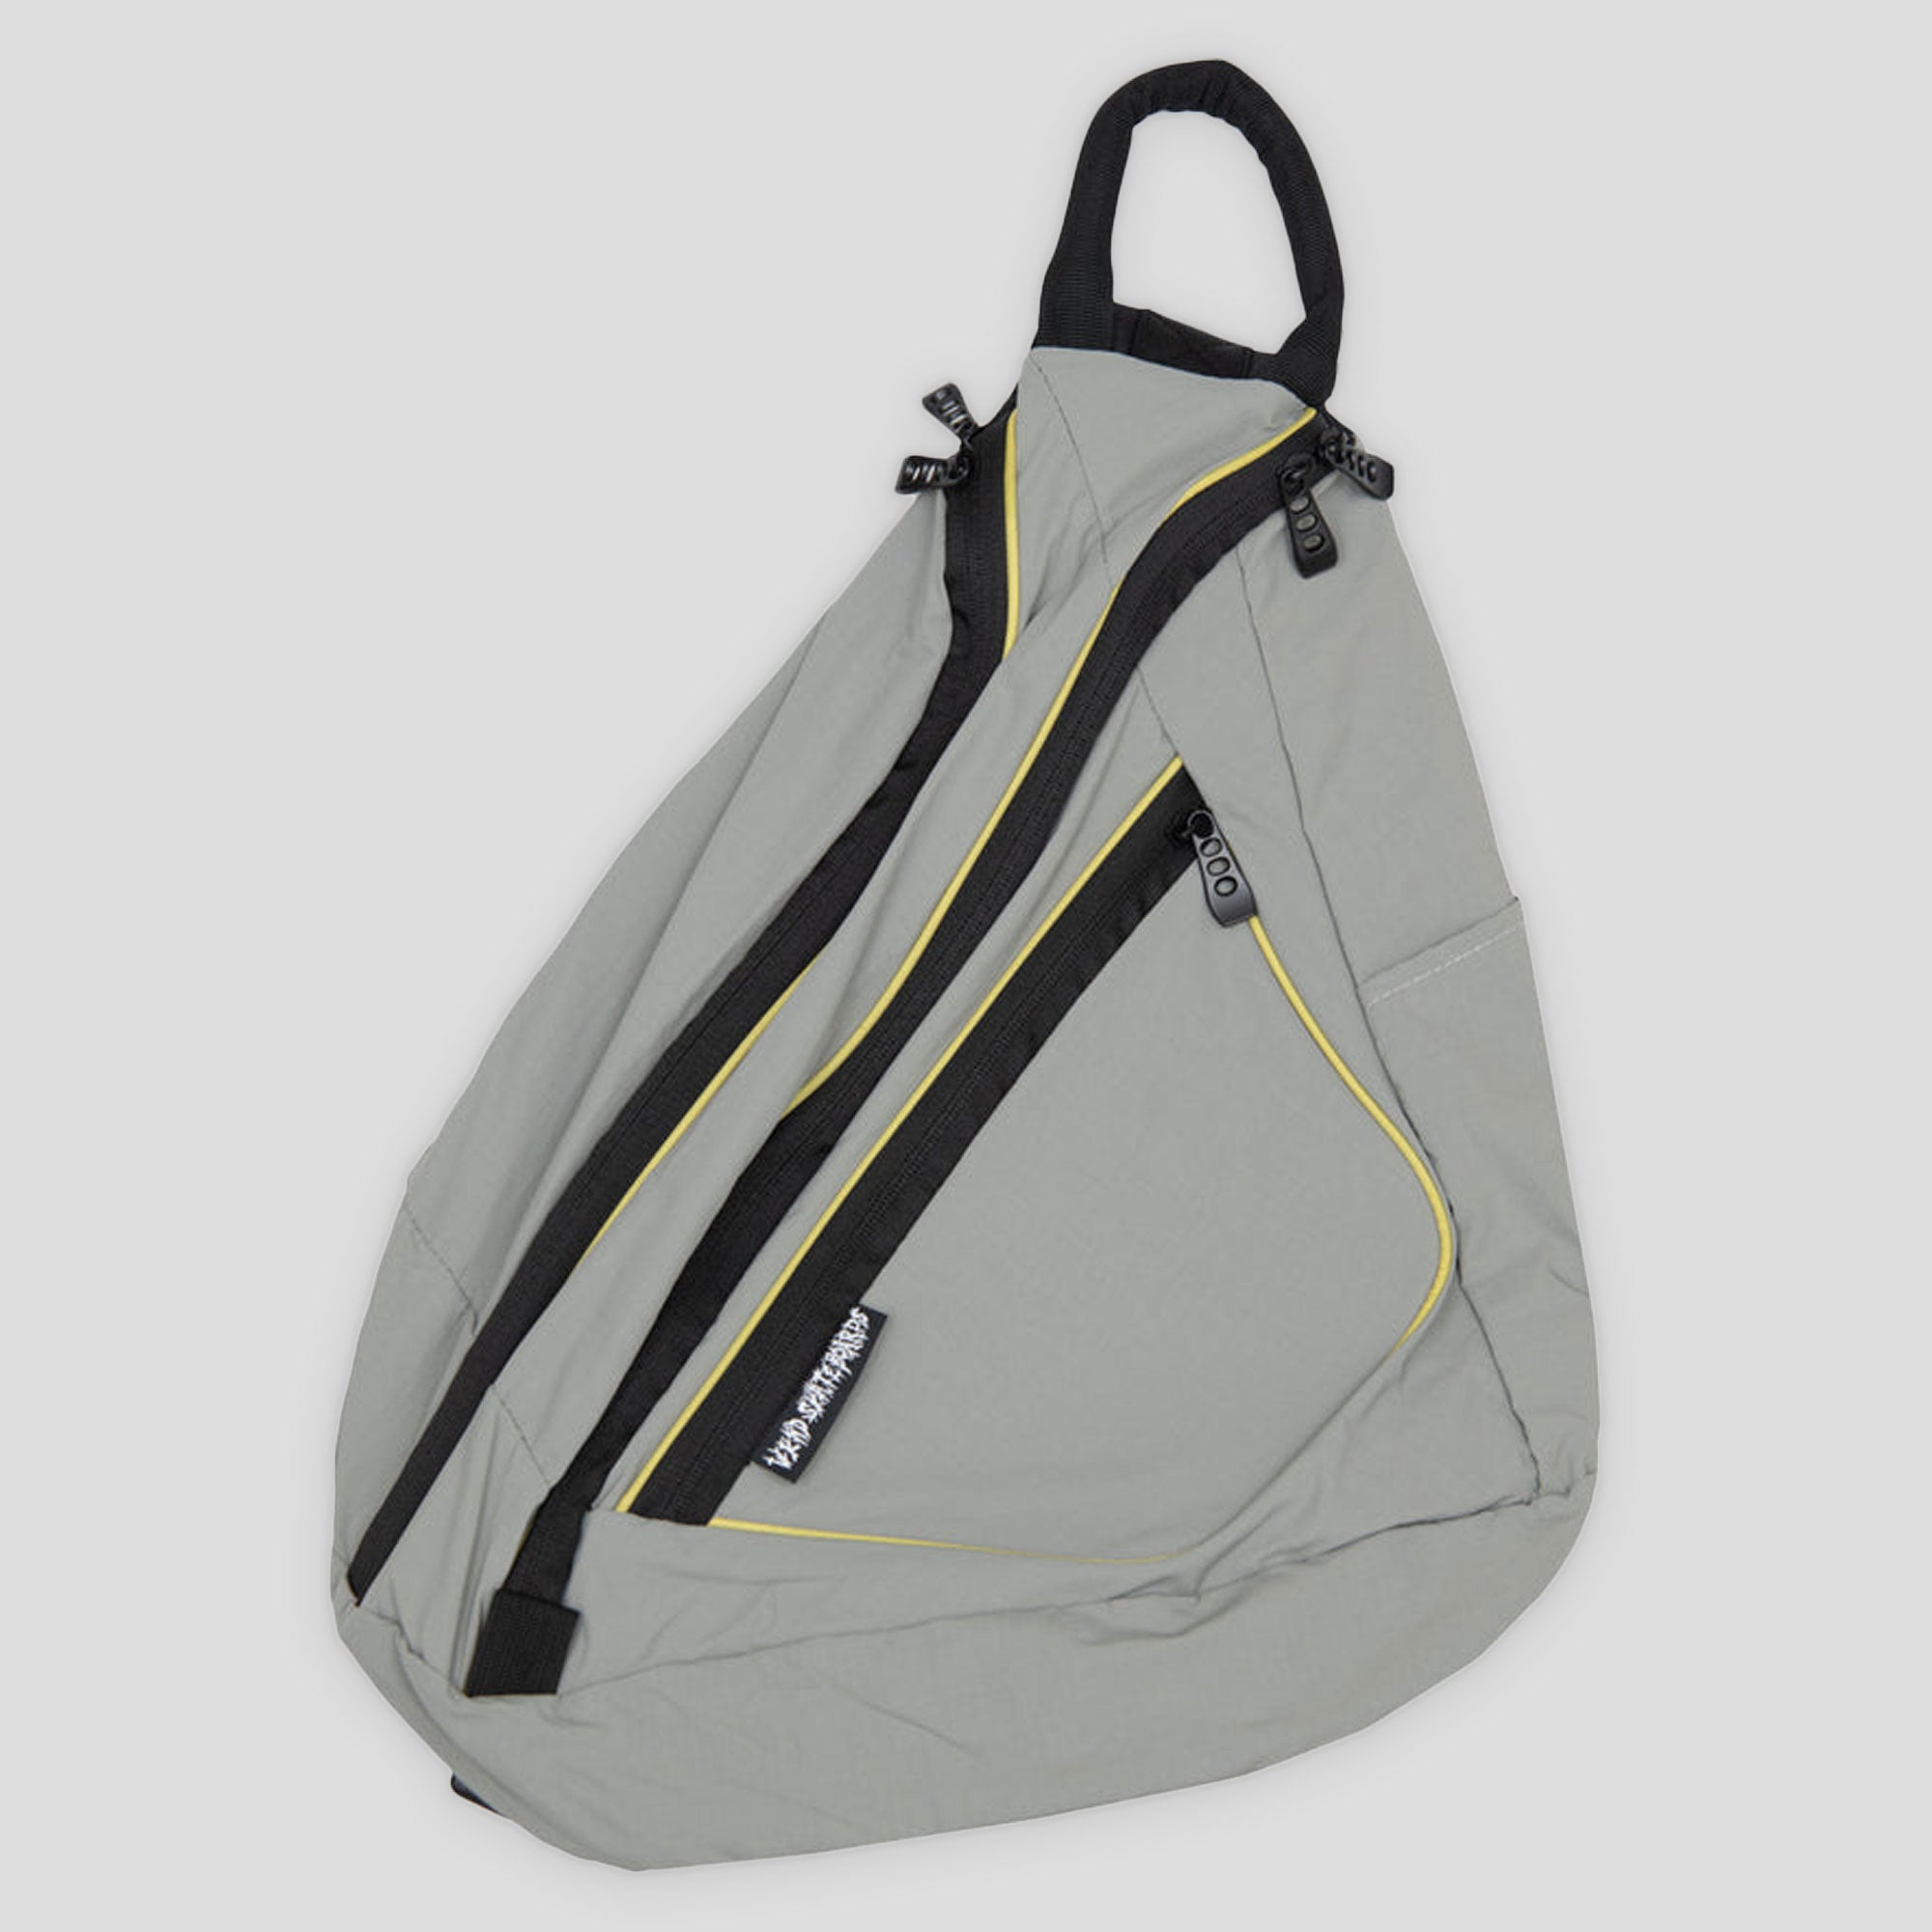 WKND Catapult Bag - Silver